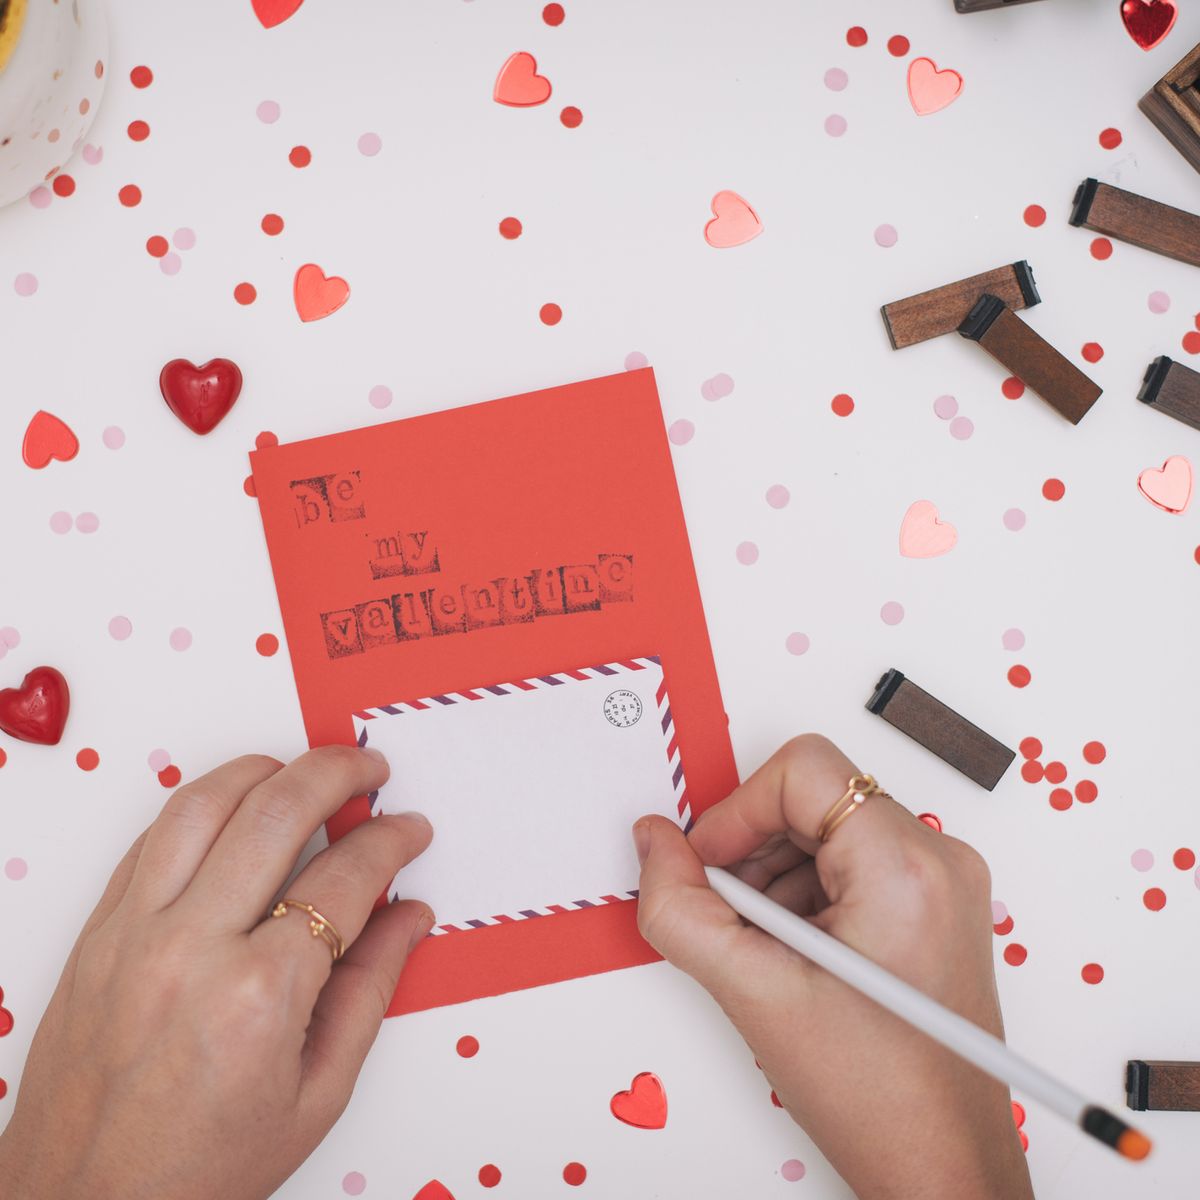 How to Write a Love Letter - Romantic Love Letter Ideas for Your Girlfriend  or Boyfriend